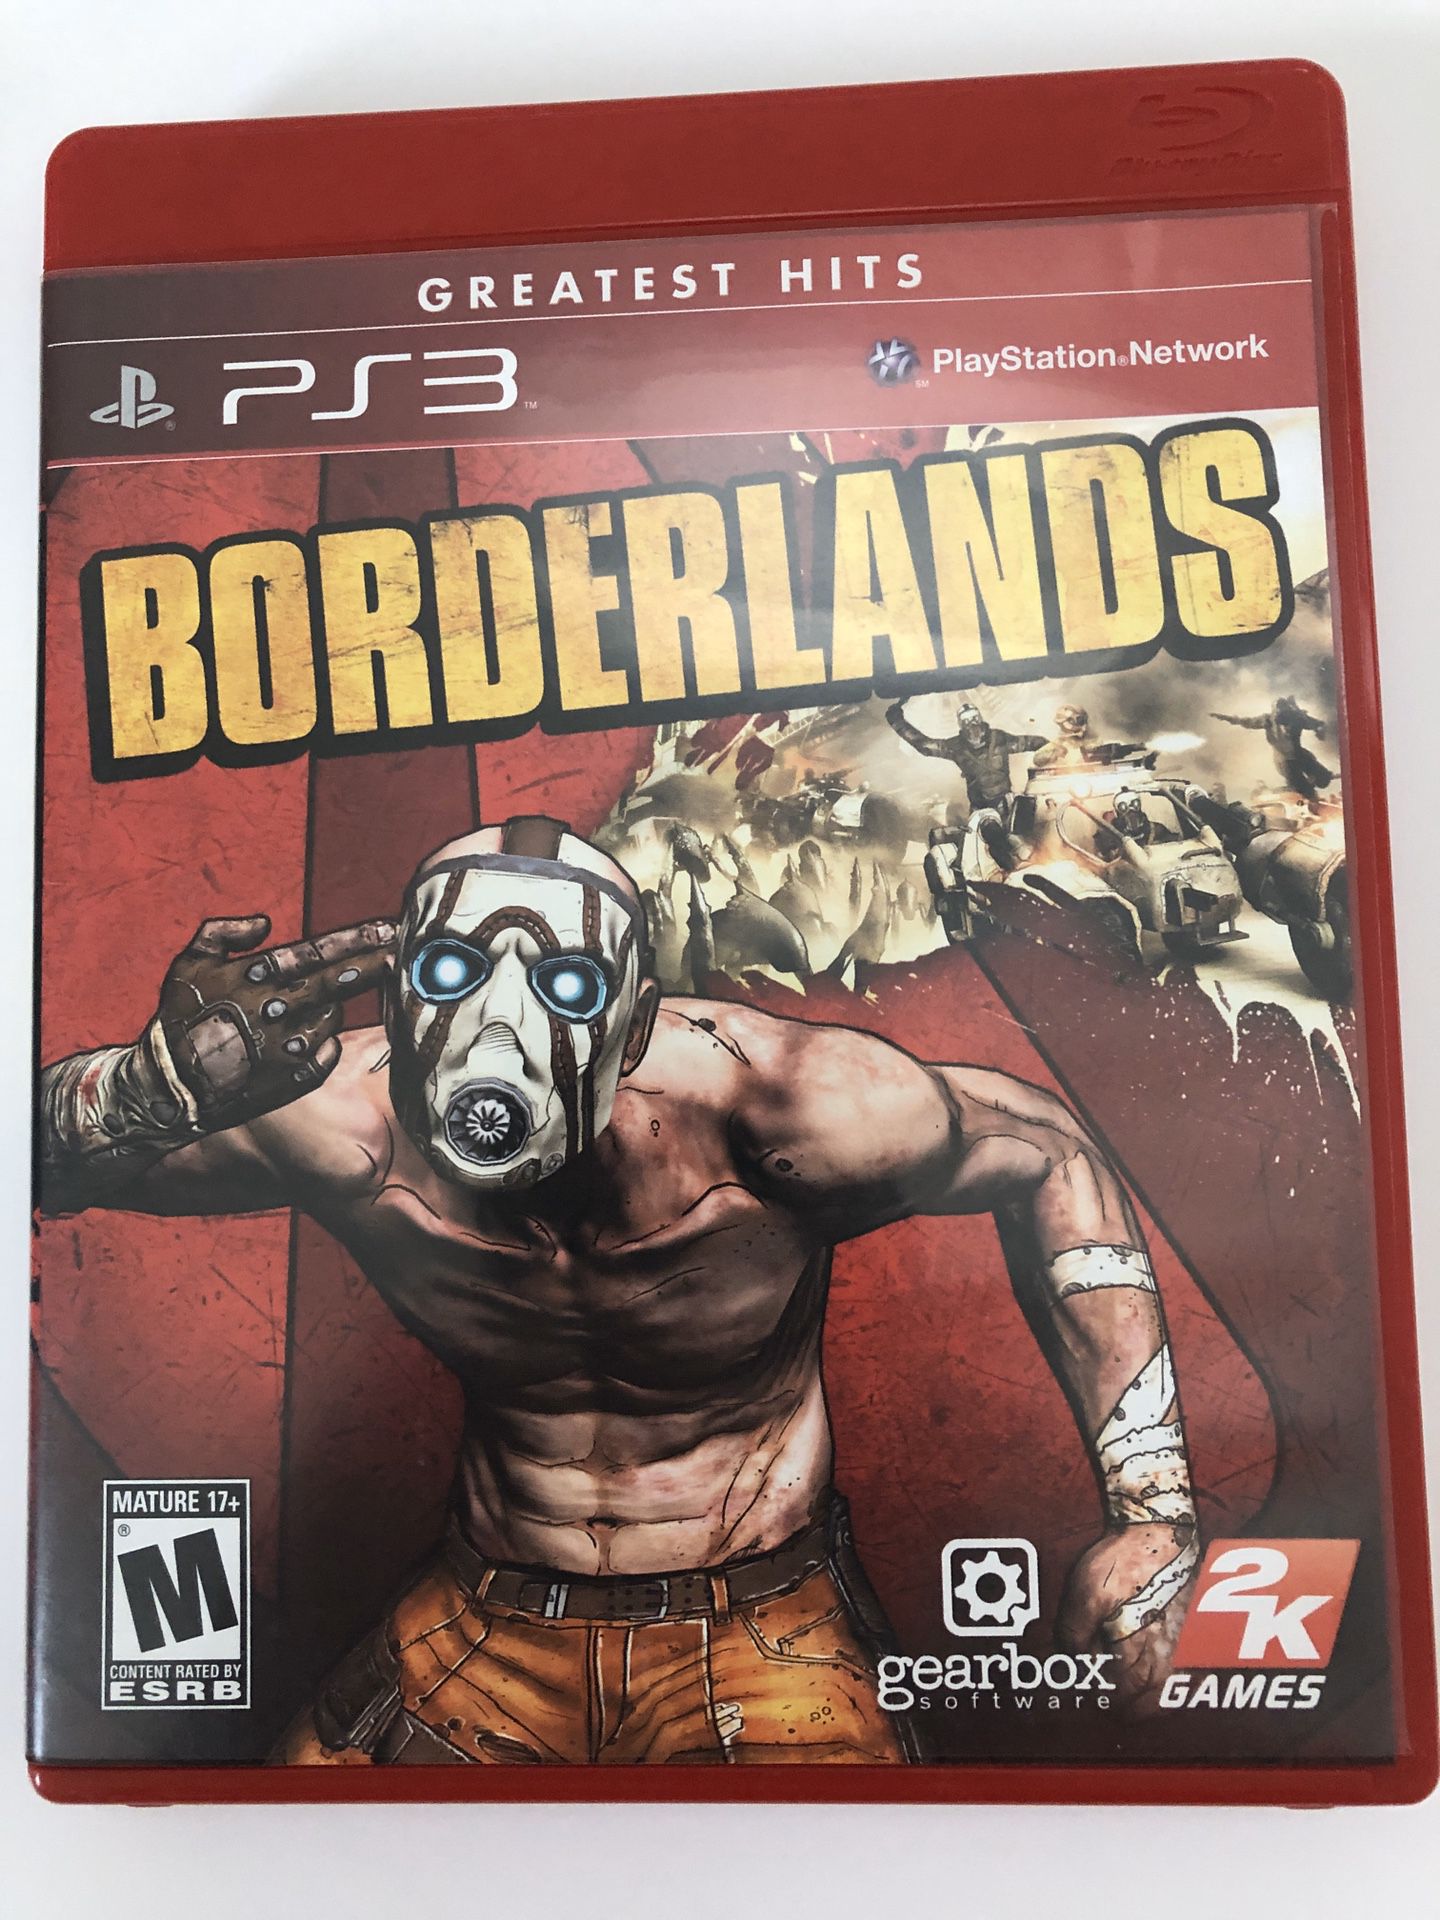 PS3 Borderlands Greatest Hits Tested